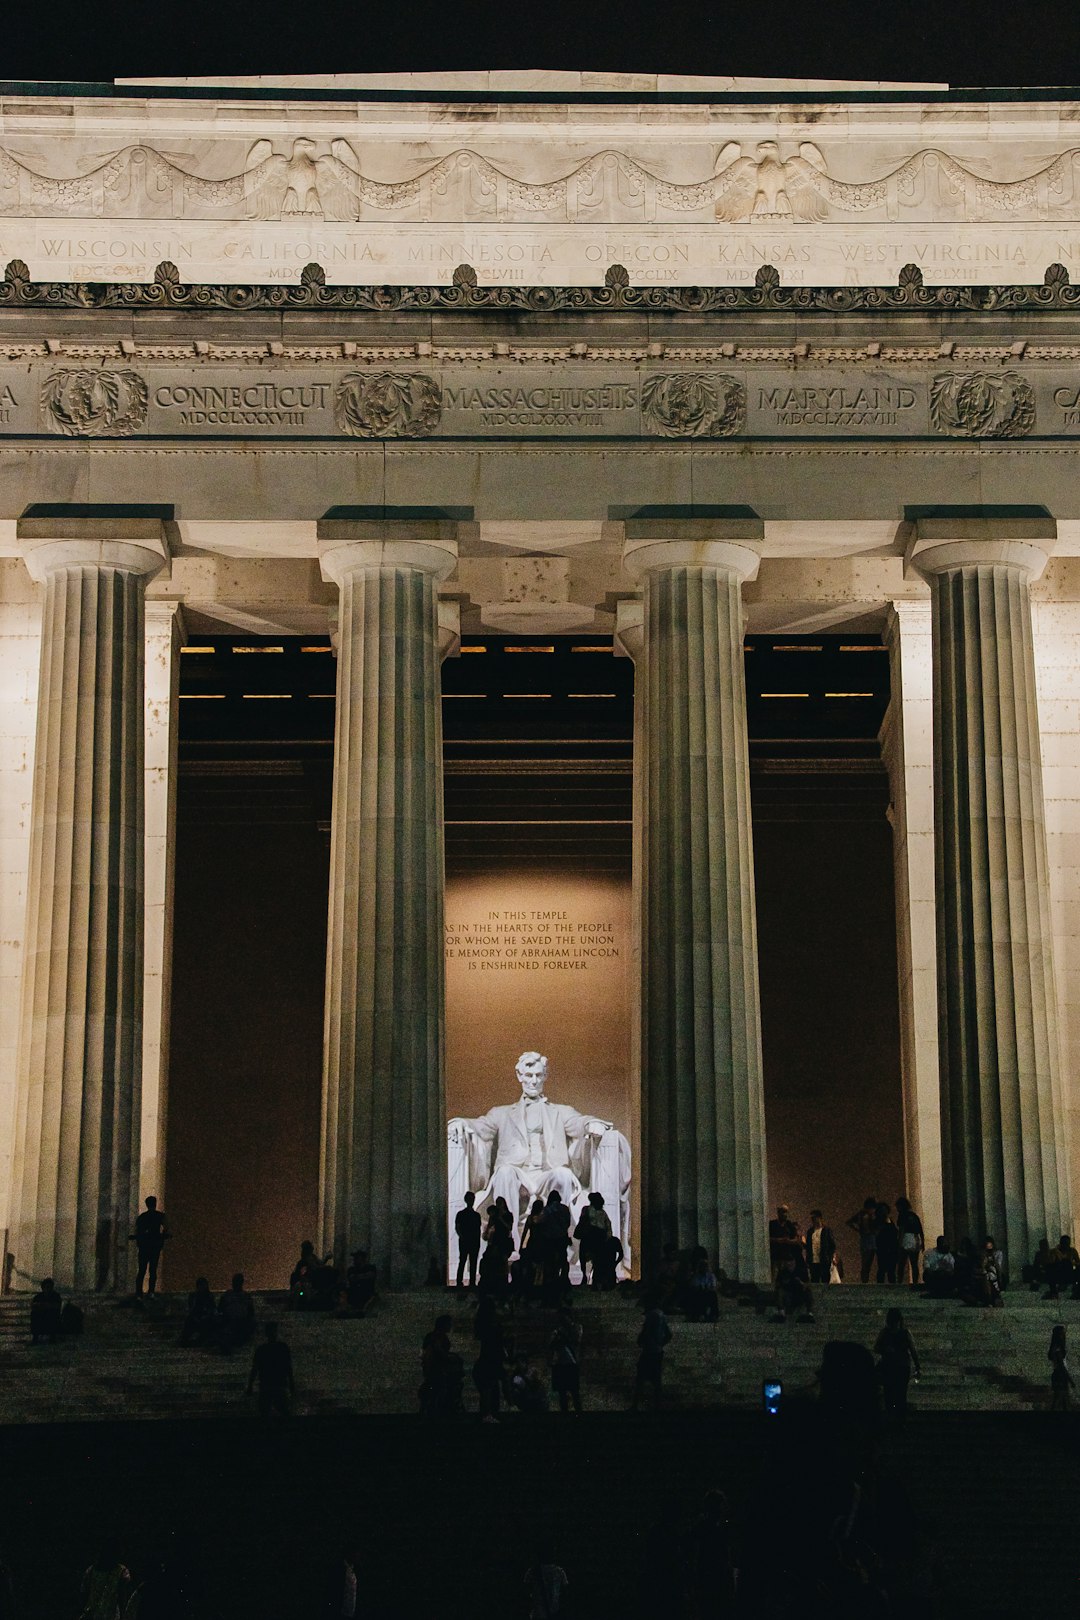 Travel Tips and Stories of Thomas Jefferson Memorial in United States